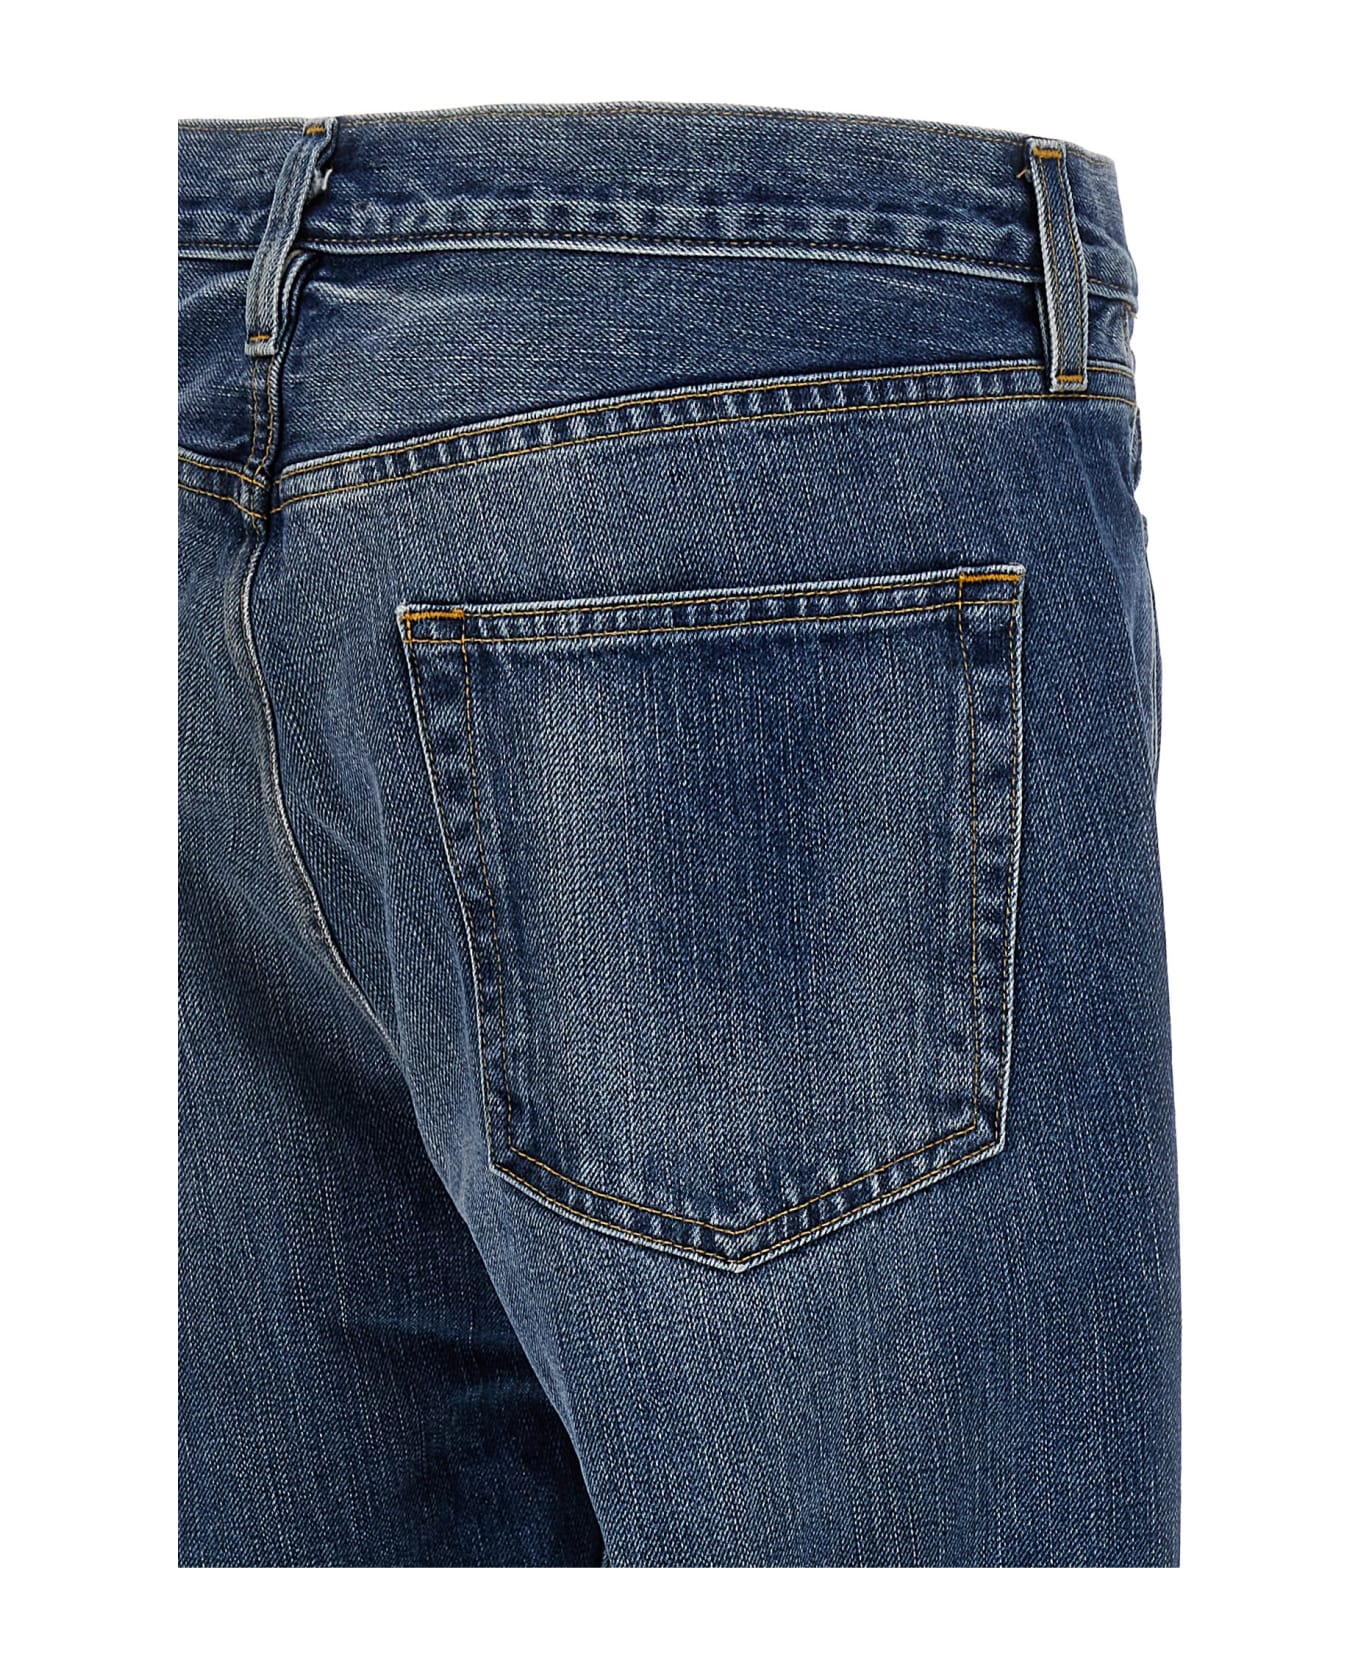 Fear of God '8th Collection' Jeans - Blue デニム